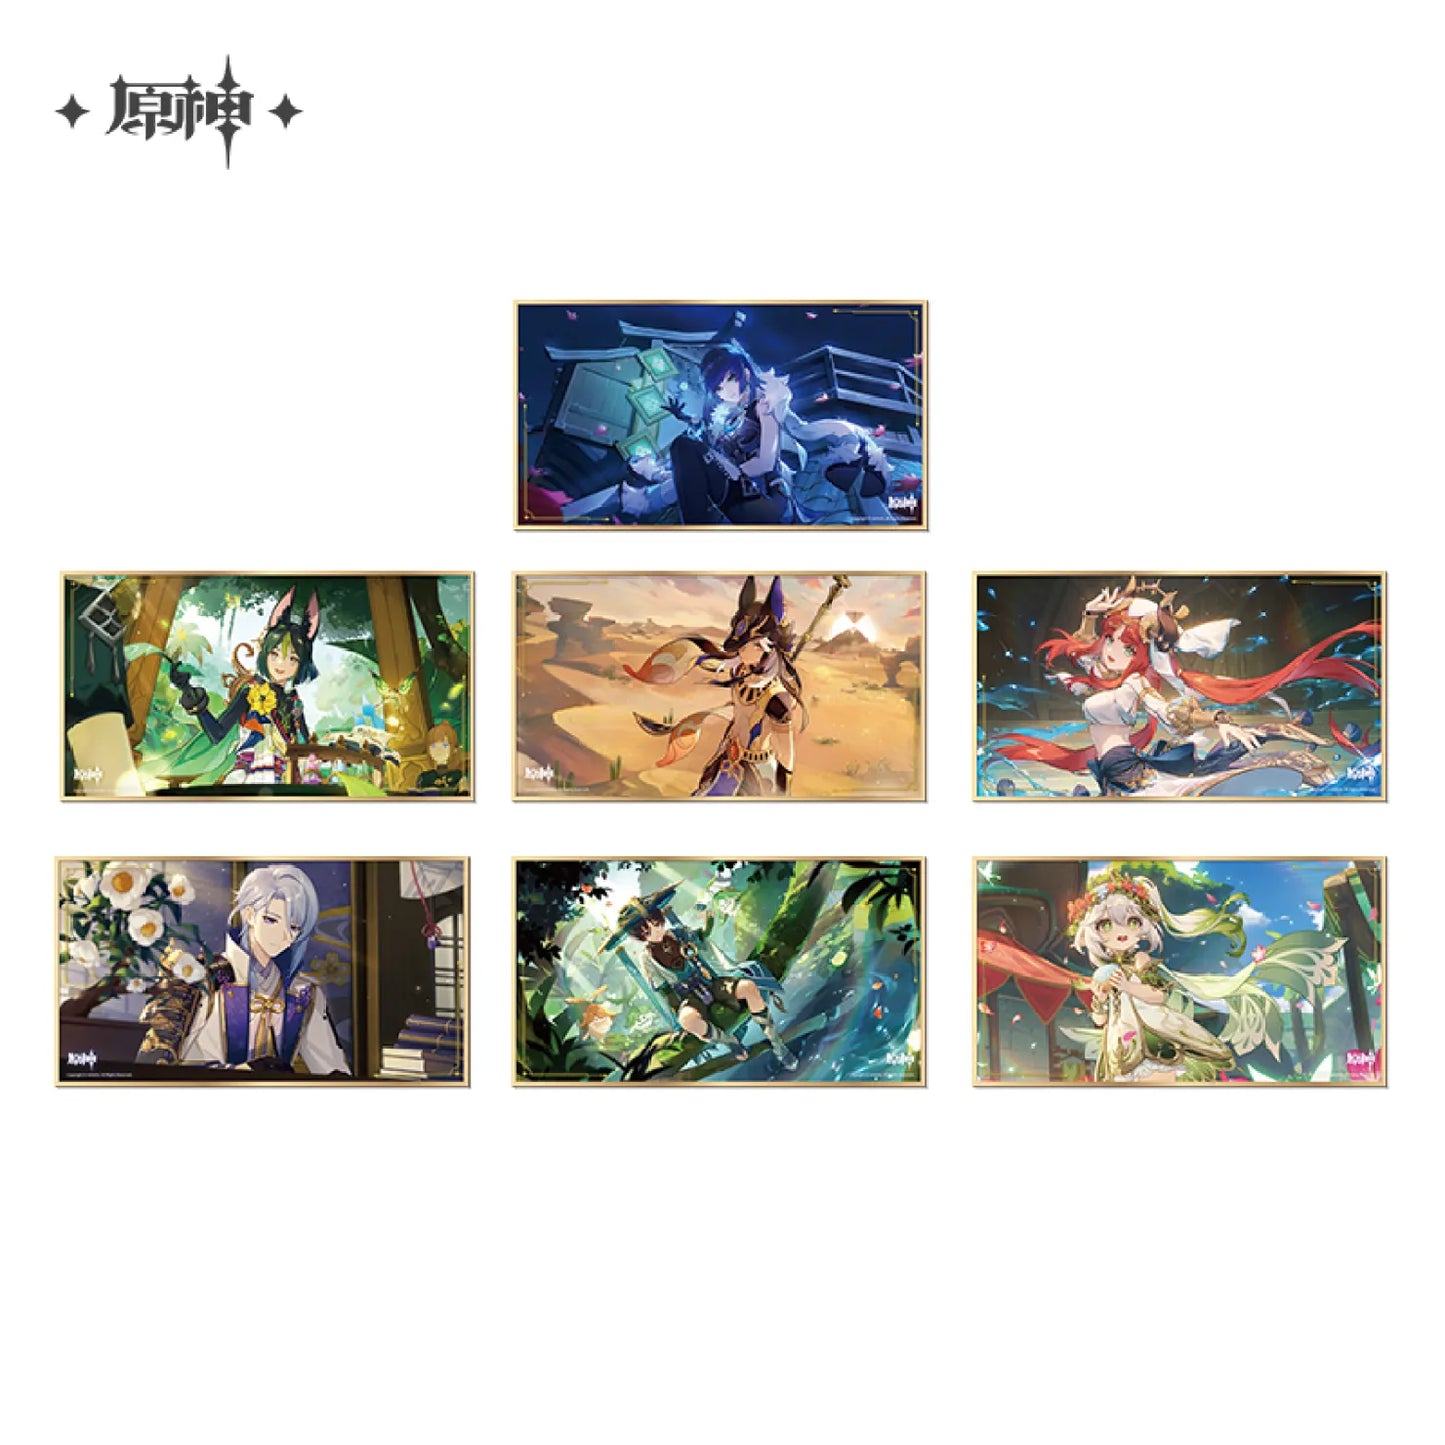 [OFFICIAL MERCHANDISE] Genshin Impact Anecdotes Series Color Paper